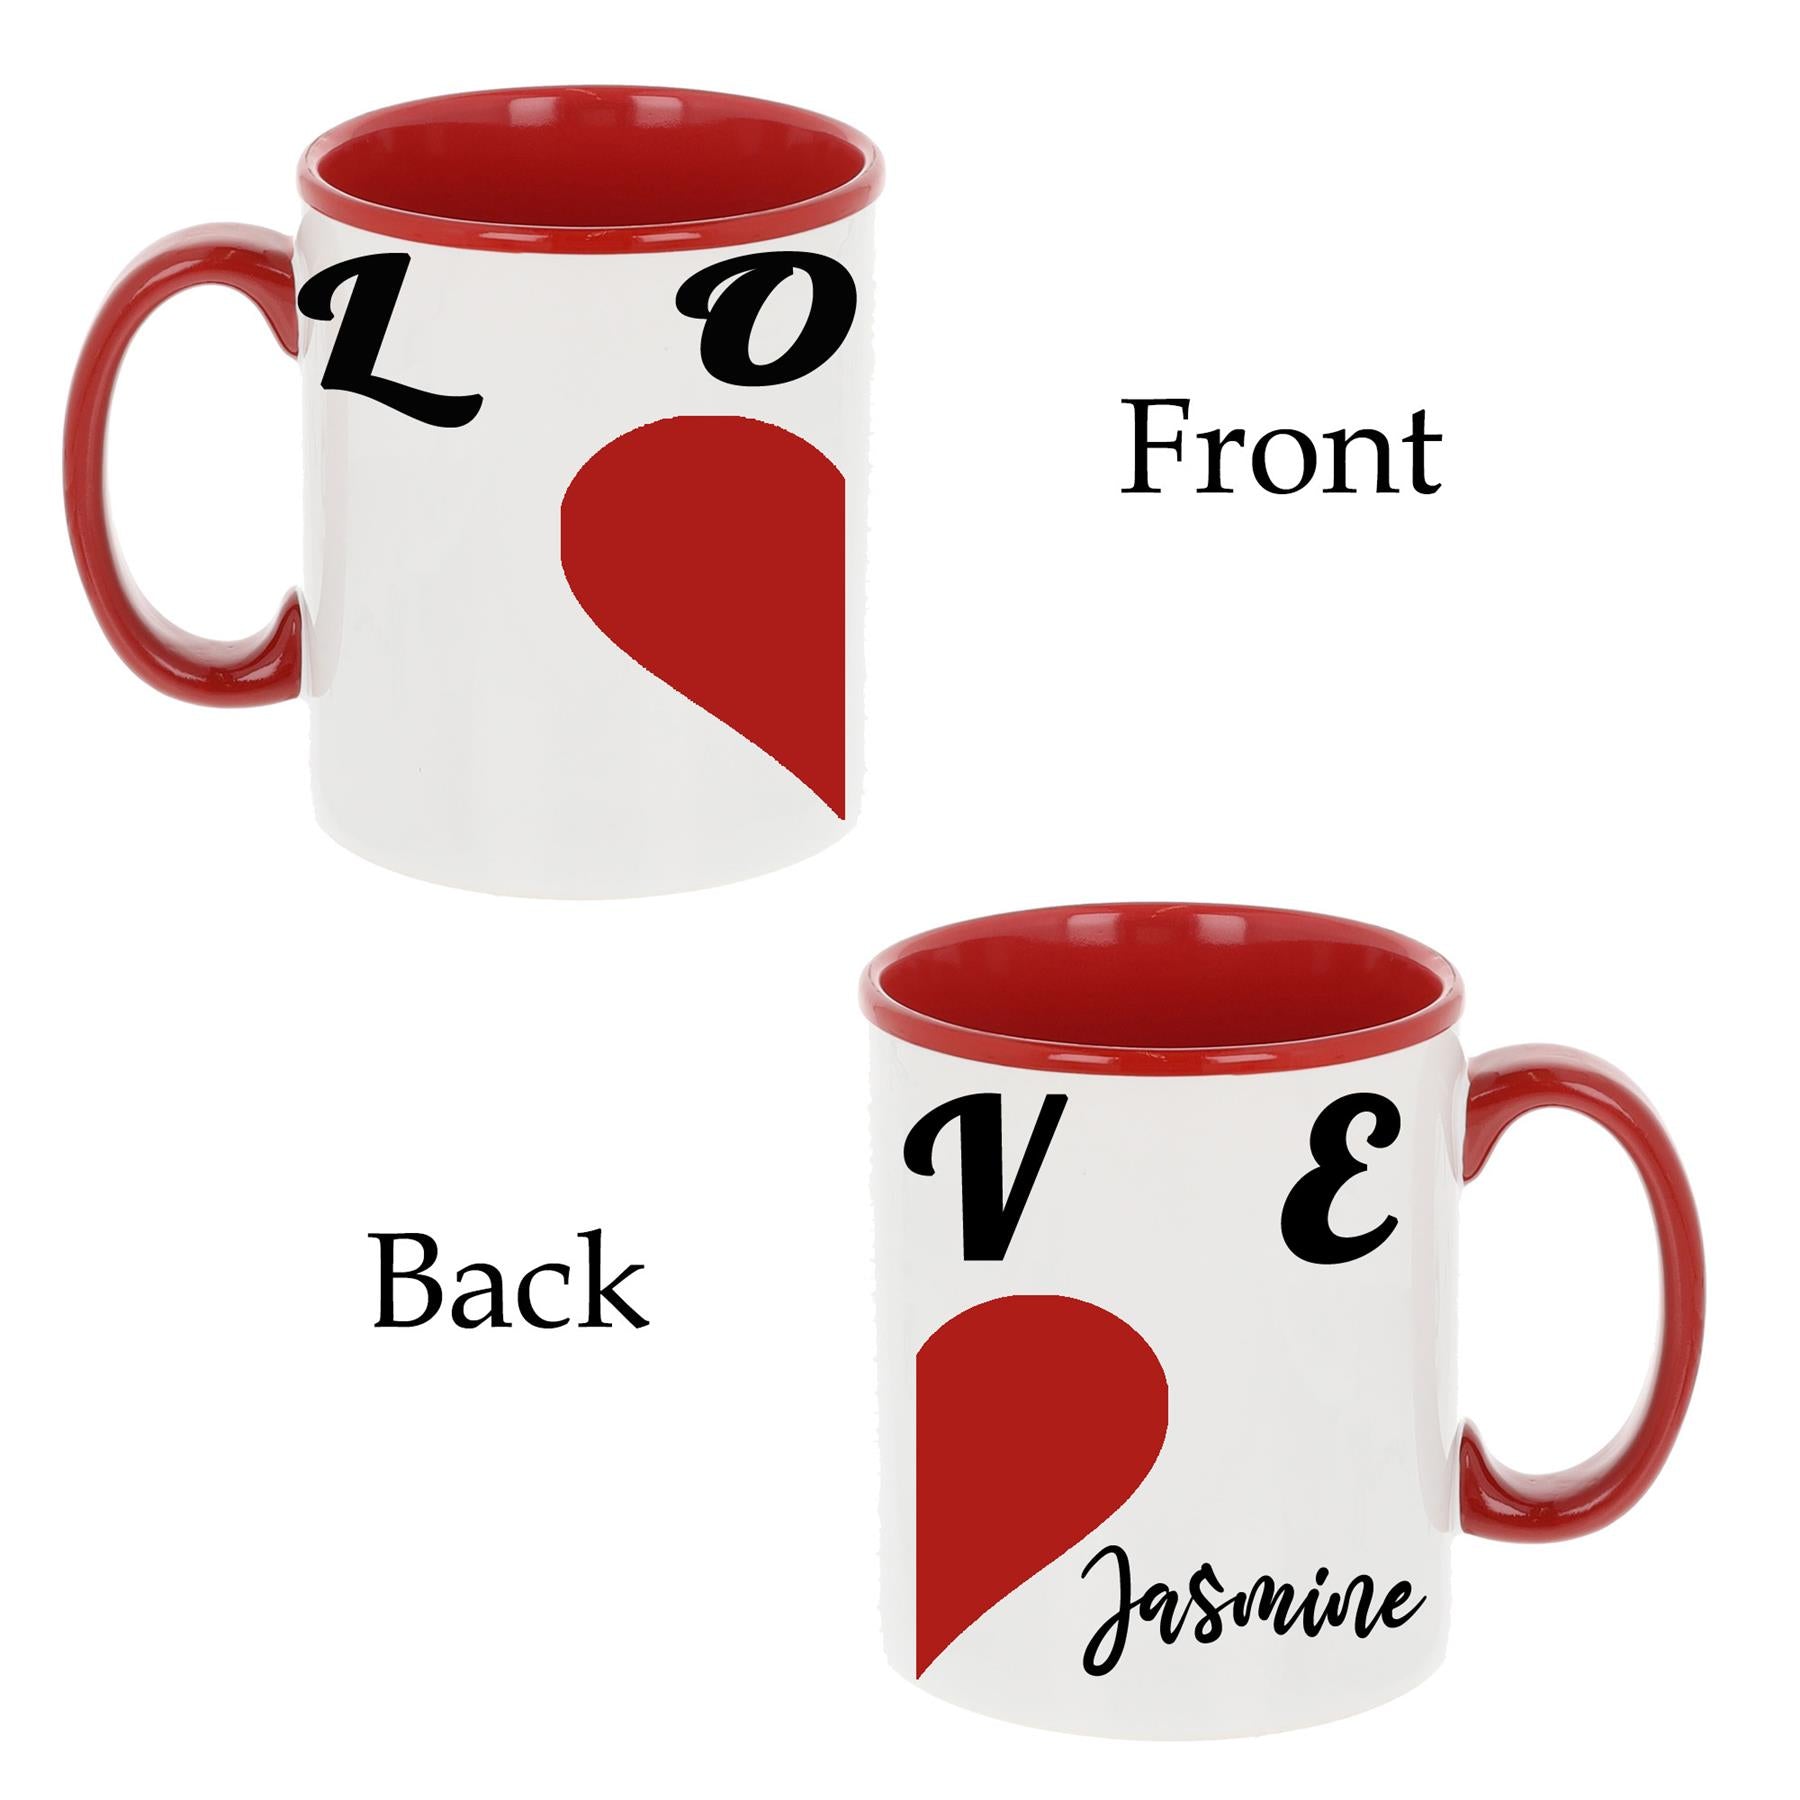 Personalised Couples Matching Heart Filled Mug Set  - Always Looking Good - Hers & Hers Empty  